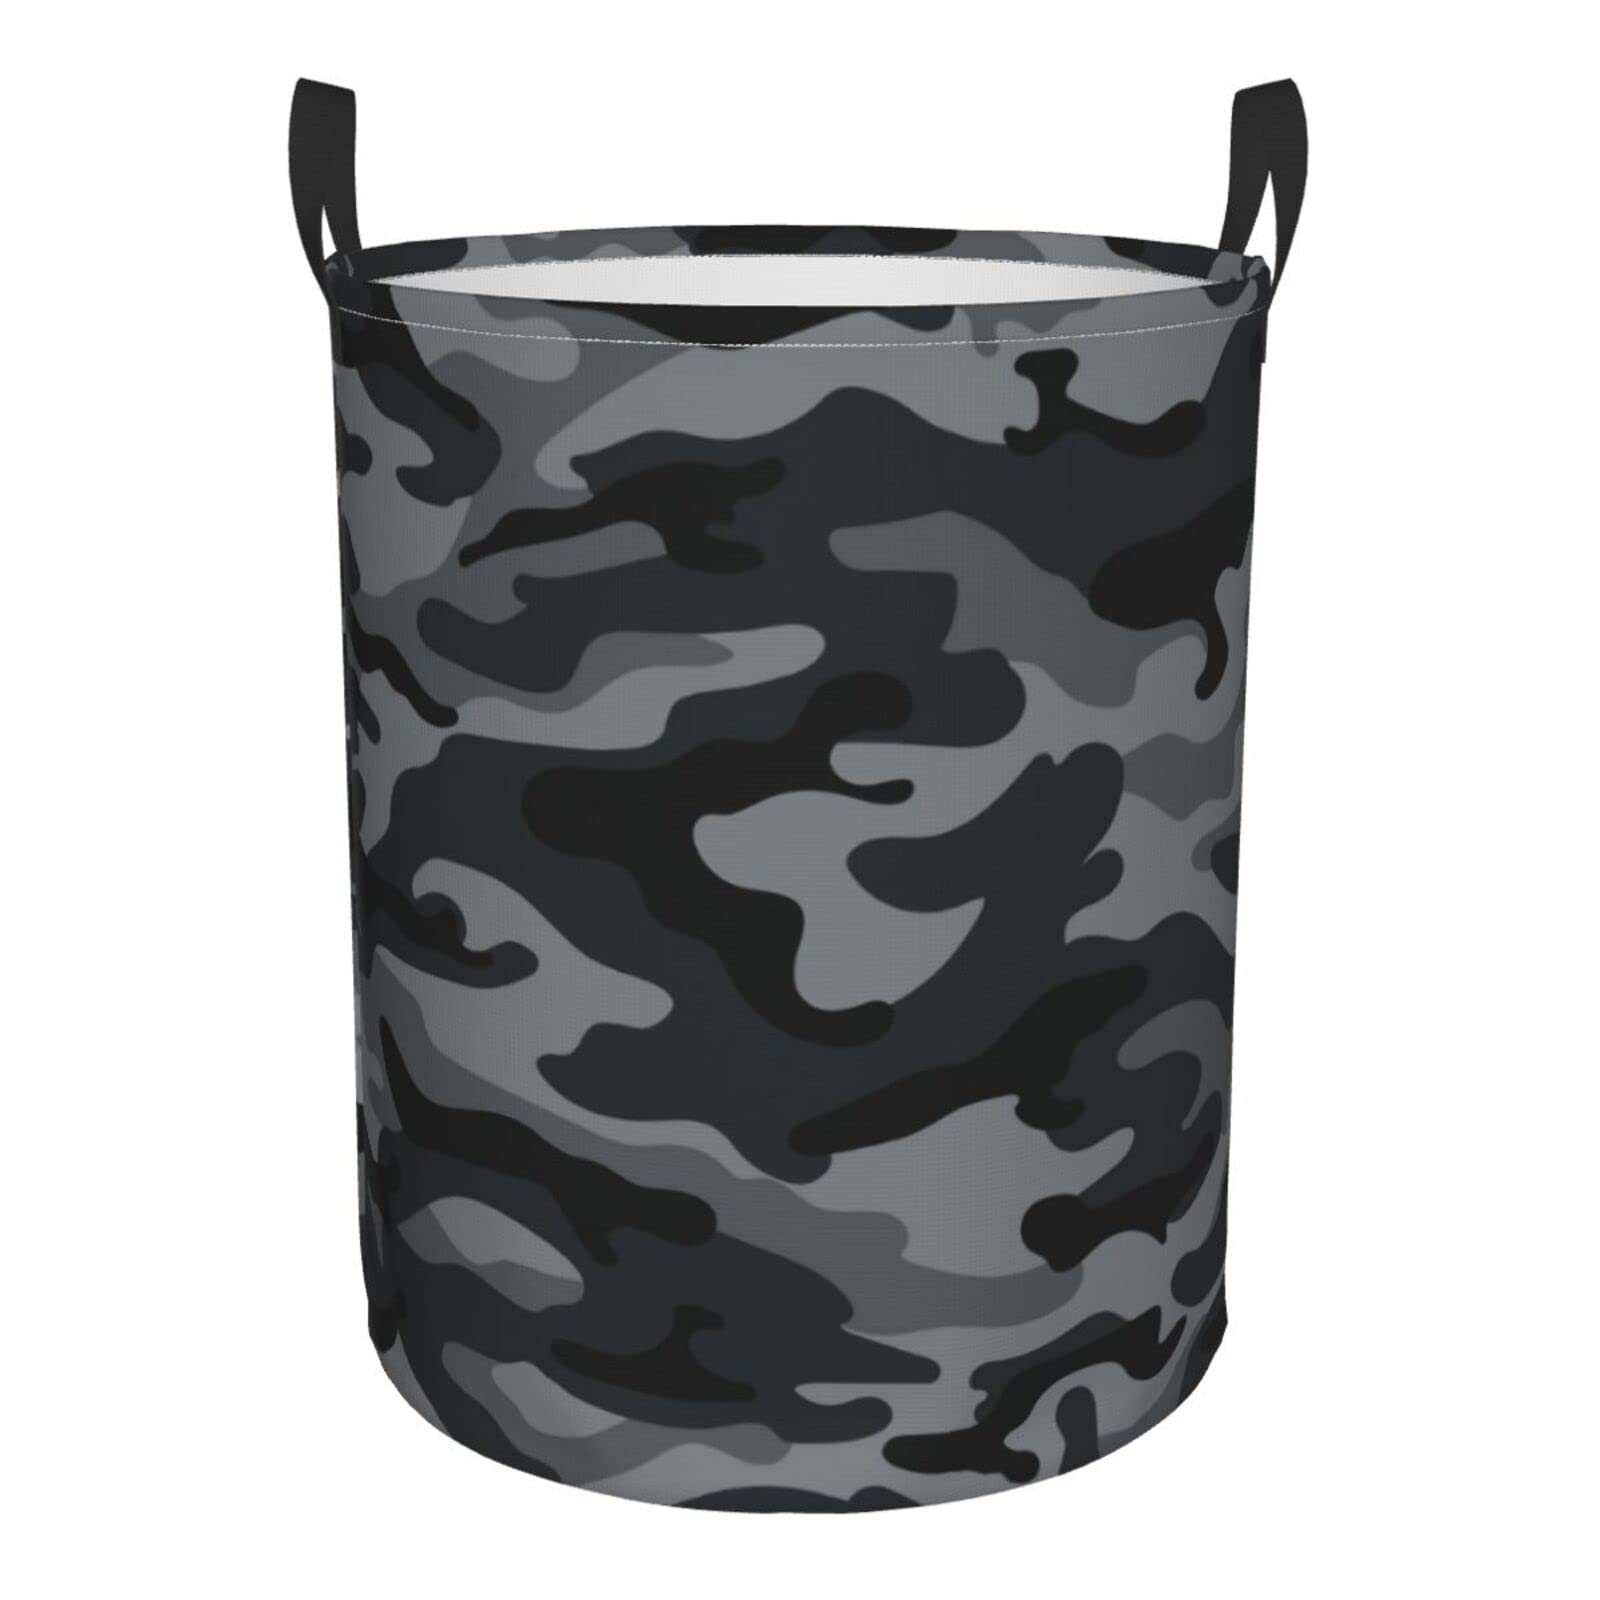 Gbuzozie 38l Round Laundry Hamper Army Camouflage Storage Basket Waterproof Coating Black And Grey Camo Organizer Bin For Nursery Clothes Toys